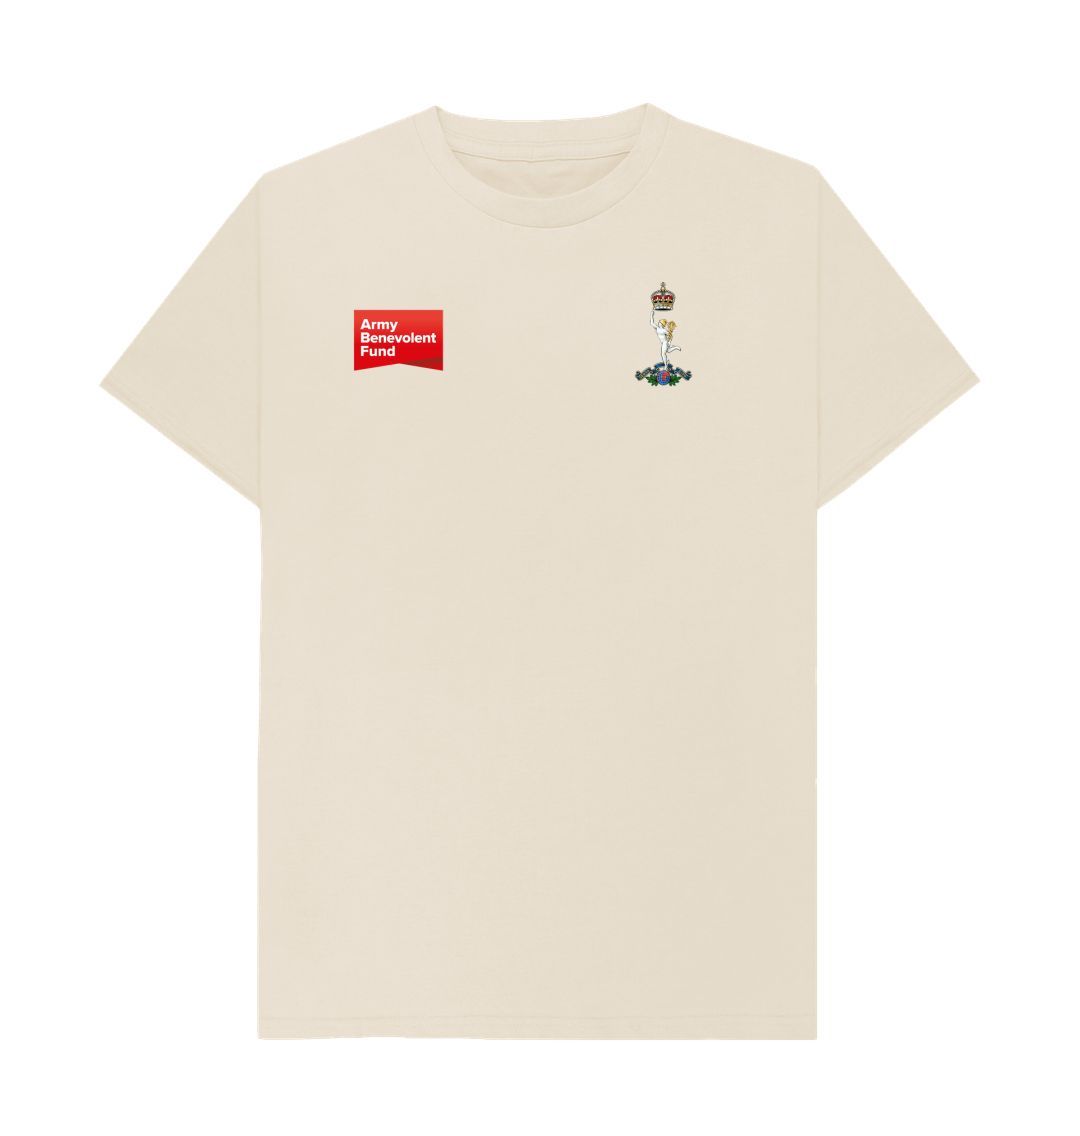 Royal Corps of Signals Unisex T-shirt - Army Benevolent Fund